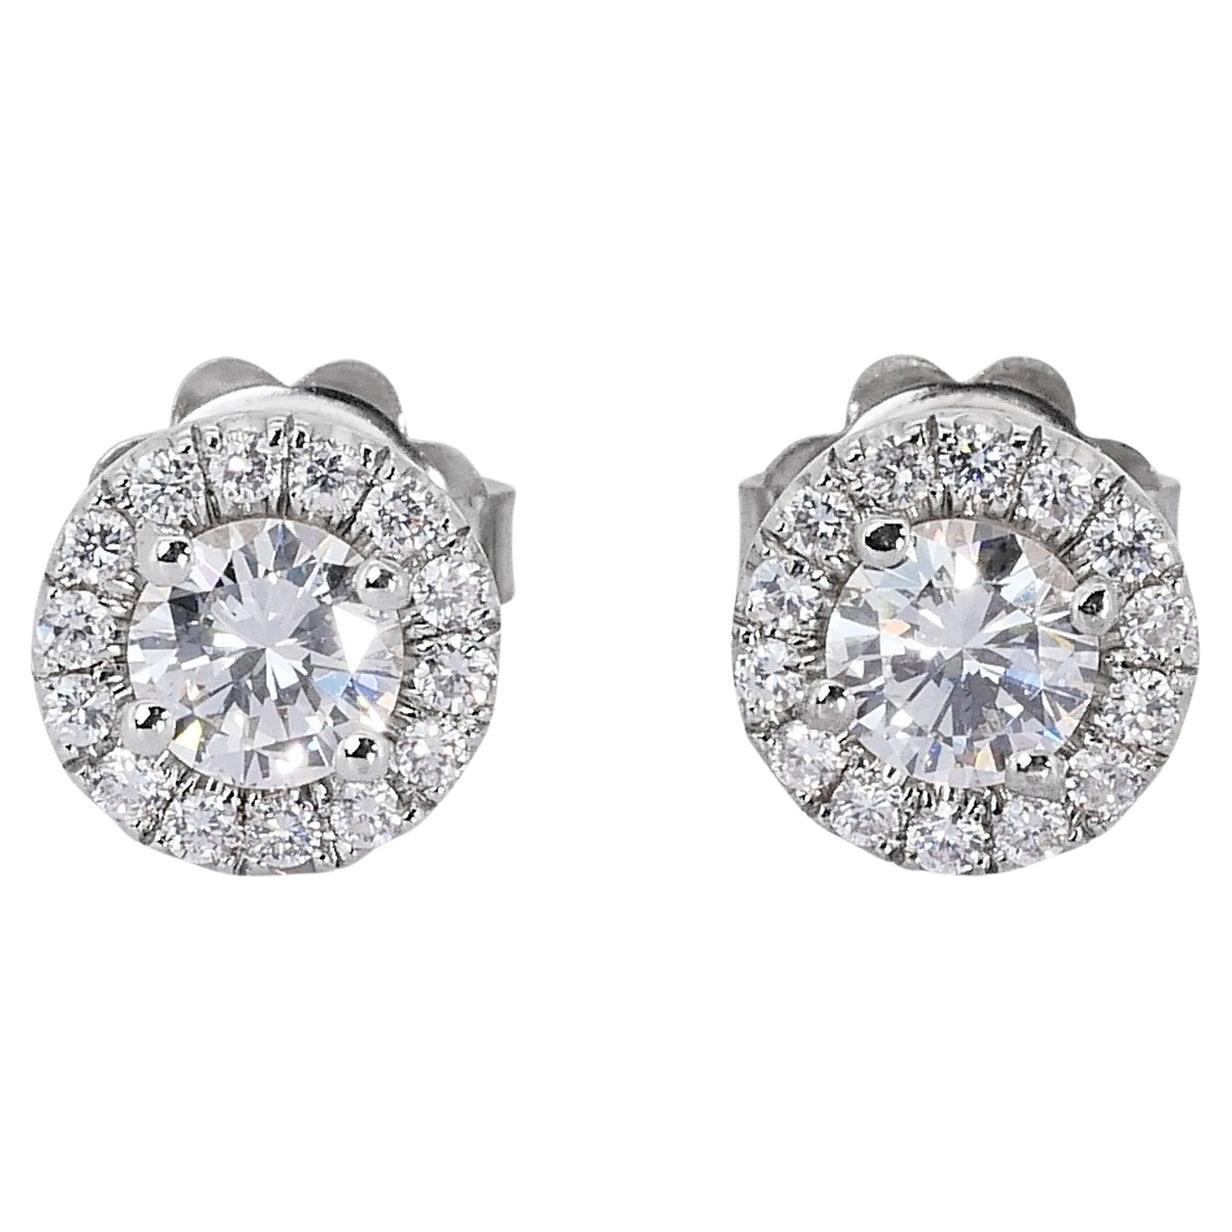 Luxurious 1.24ct Round Diamond Stud Earrings in 18K White Gold - GIA Certified For Sale